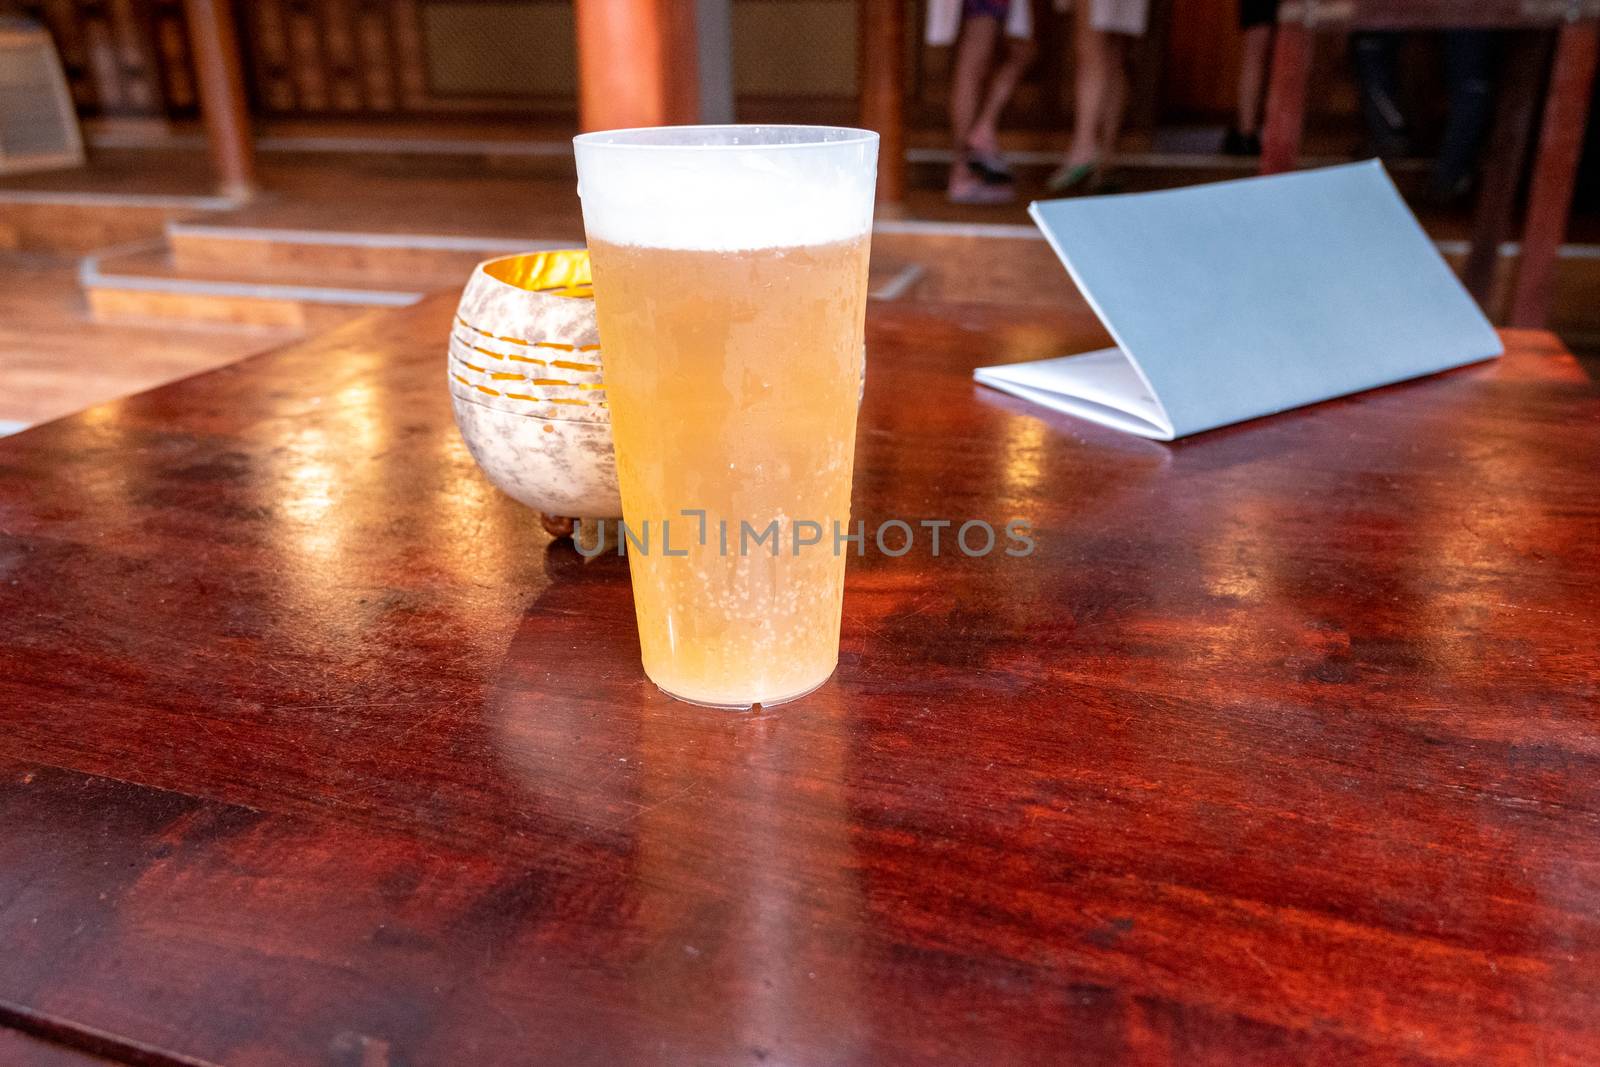 A shiny wooden table in a bar or restaurant with a drink, similar to beer, in a plastic cup. Also a drink or menu card, a gold-coloured bowl for a candle. In the background people at the bar.